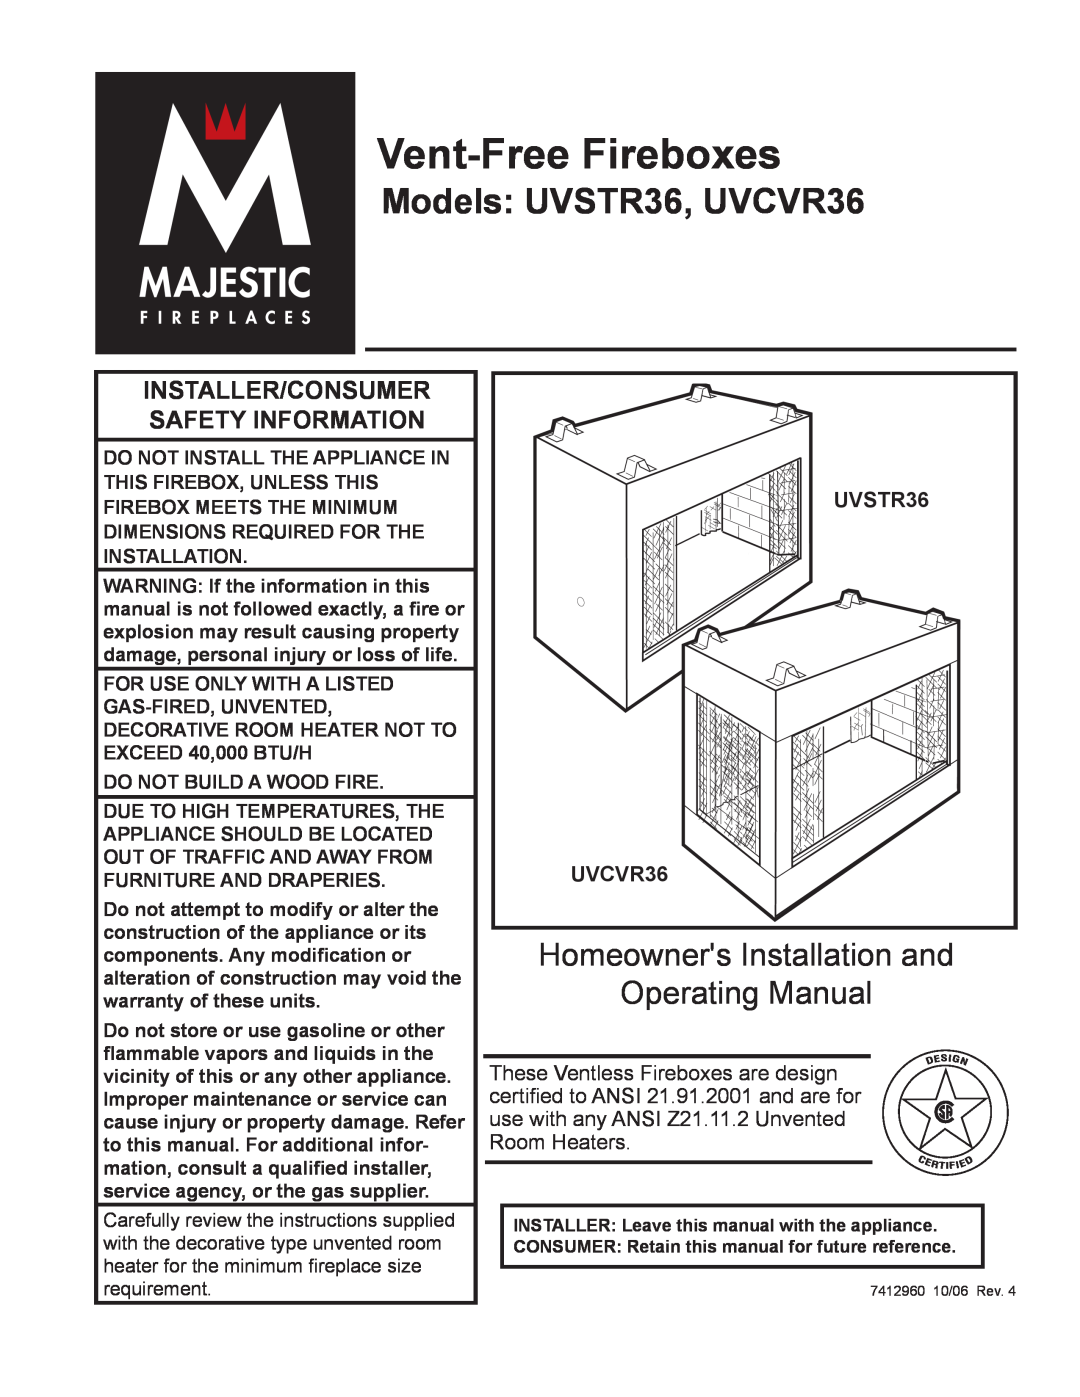 CFM dimensions Vent-Free Fireboxes, Models UVSTR36, UVCVR36, Homeowners Installation and Operating Manual, Room Heaters 